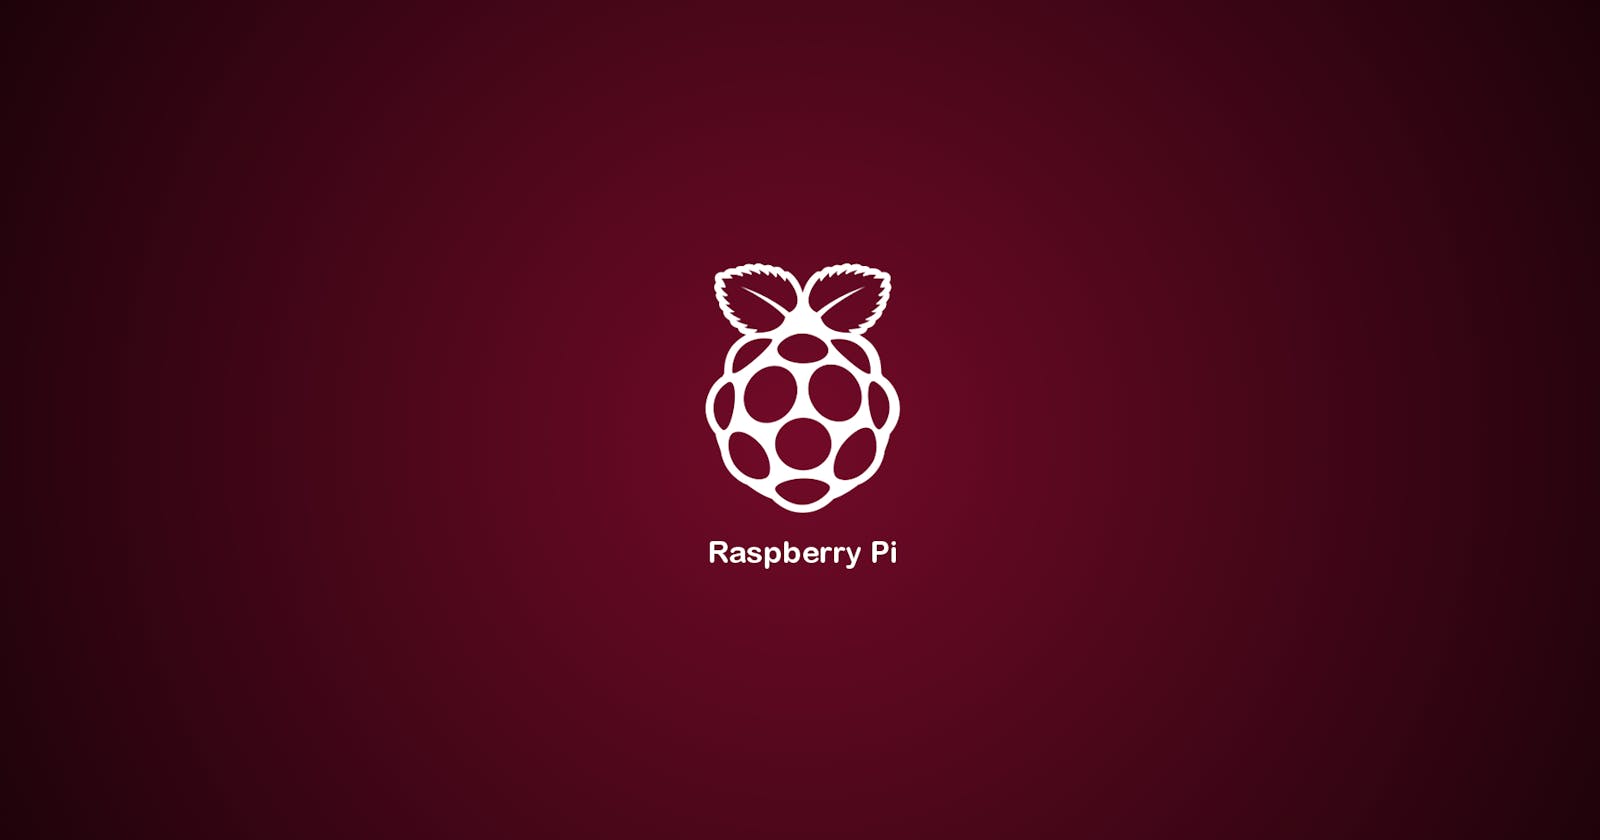 Build your own Homelab with a Raspberry Pi Zero 2 W and Cloudflare Zero Trust